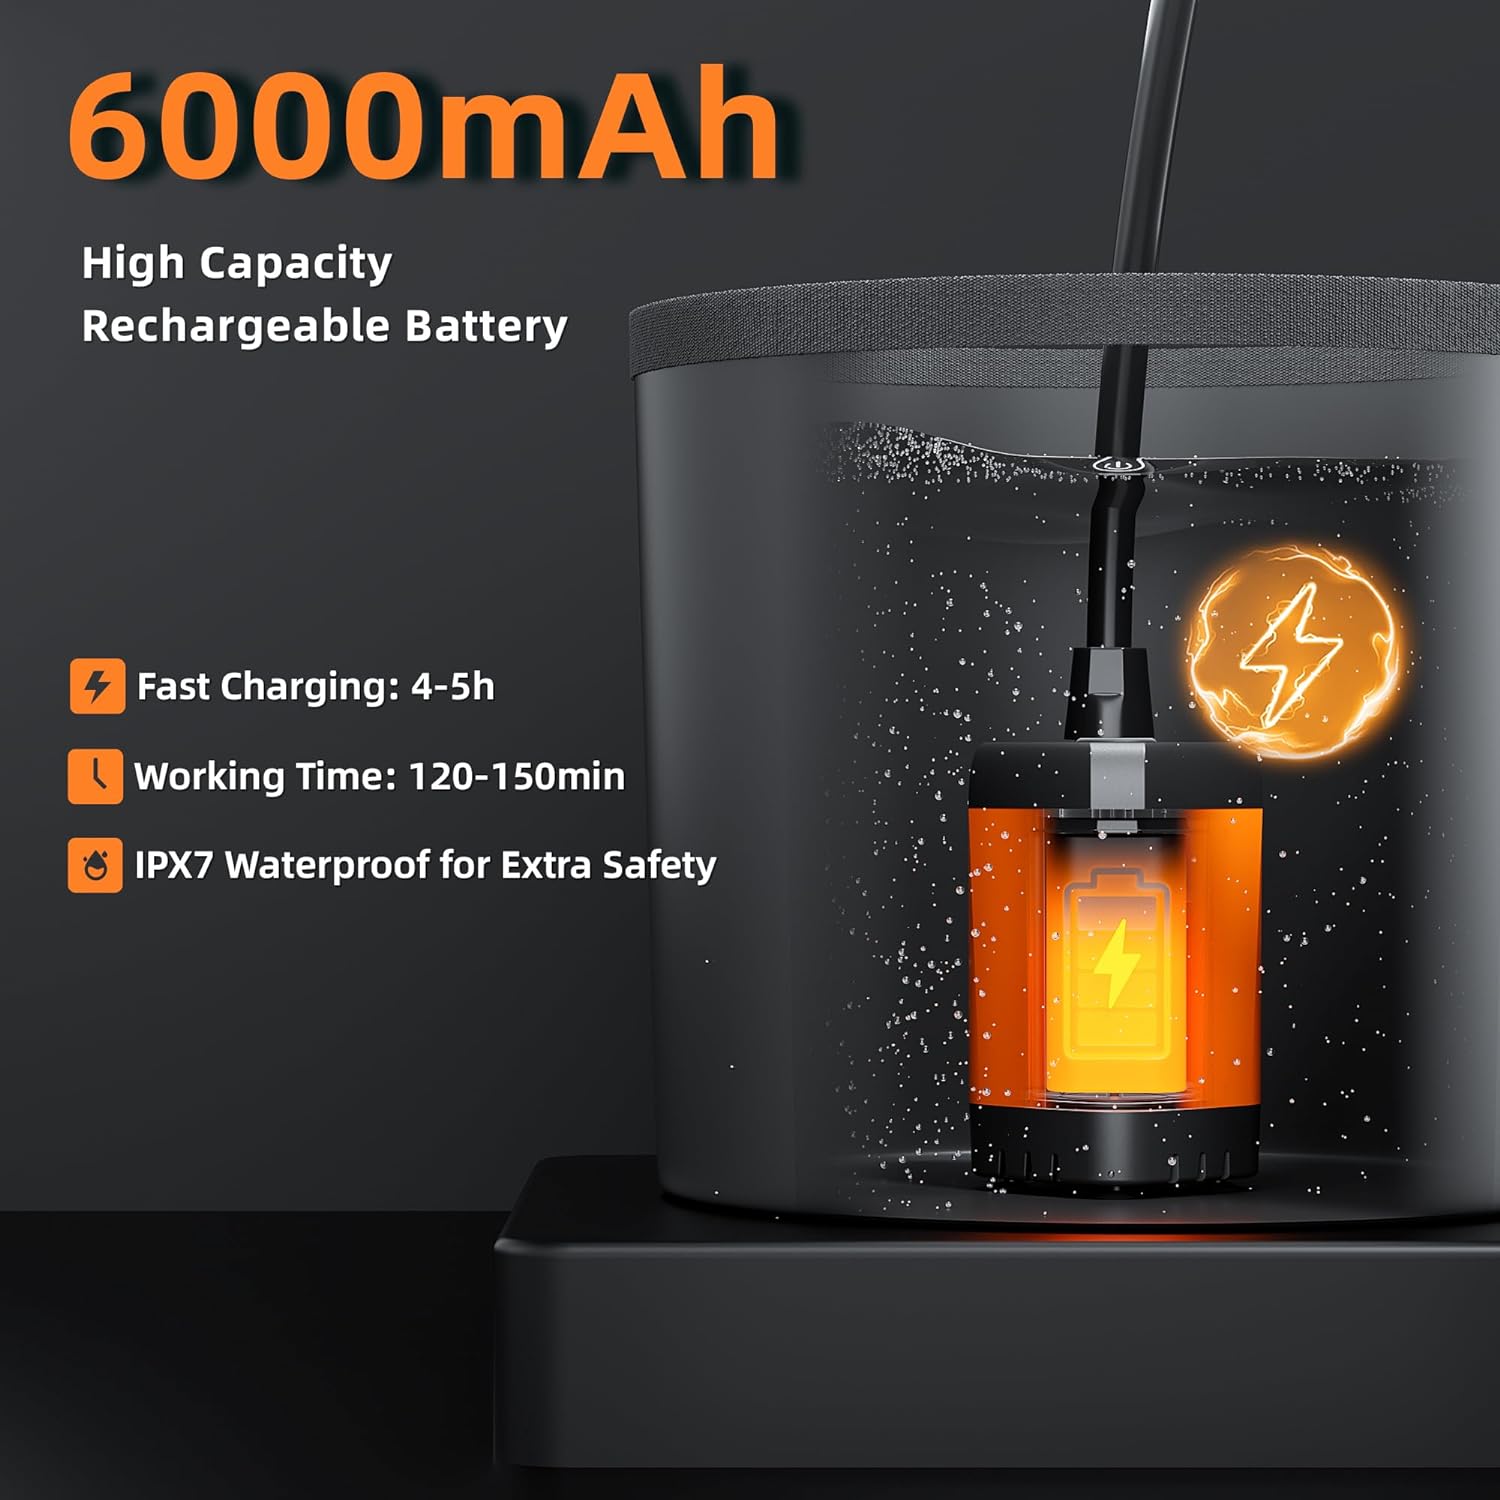 Portable Camping Shower, Upgrade 6000mAh Rechargeable Electric Shower Pump & 5 Gallon Collapsible Bucket, LED Display, Multiple Spray Modes, Portable Shower for Outdoor Camping Hiking (Orange)